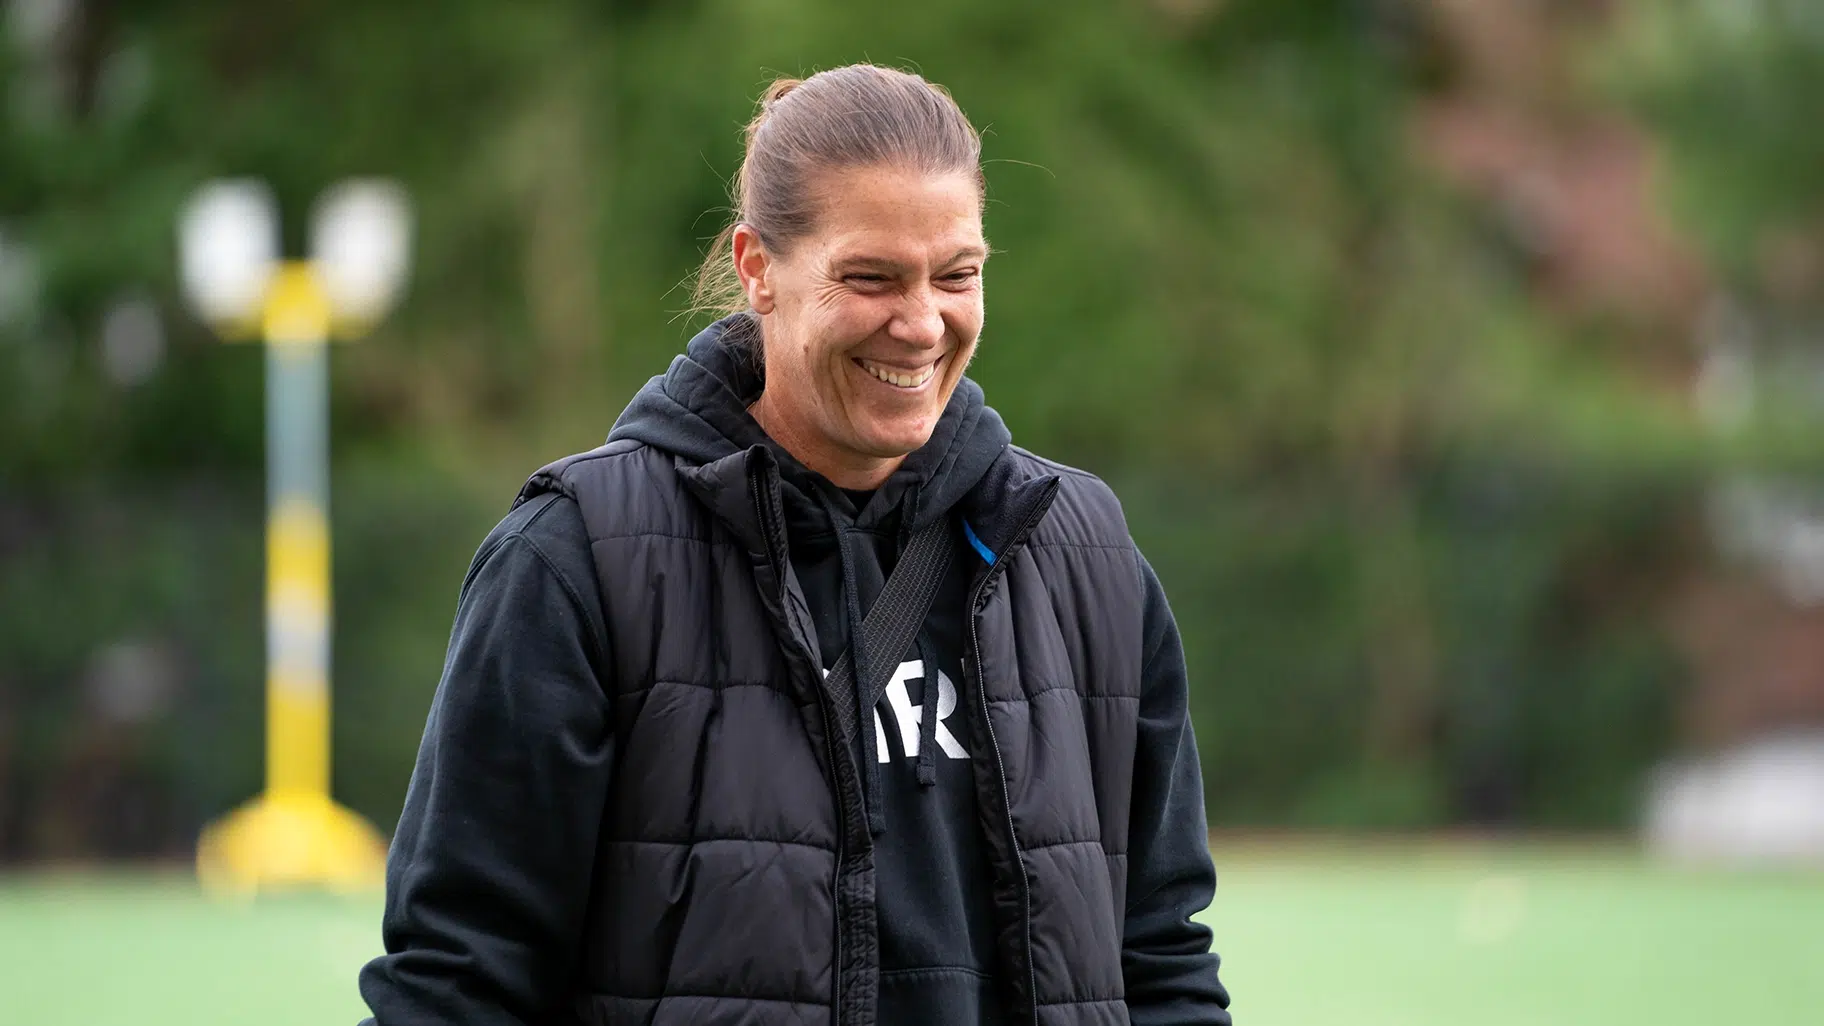 Nicole Barnhart in a black sweatshirt and jacket smiles on a soccer field.